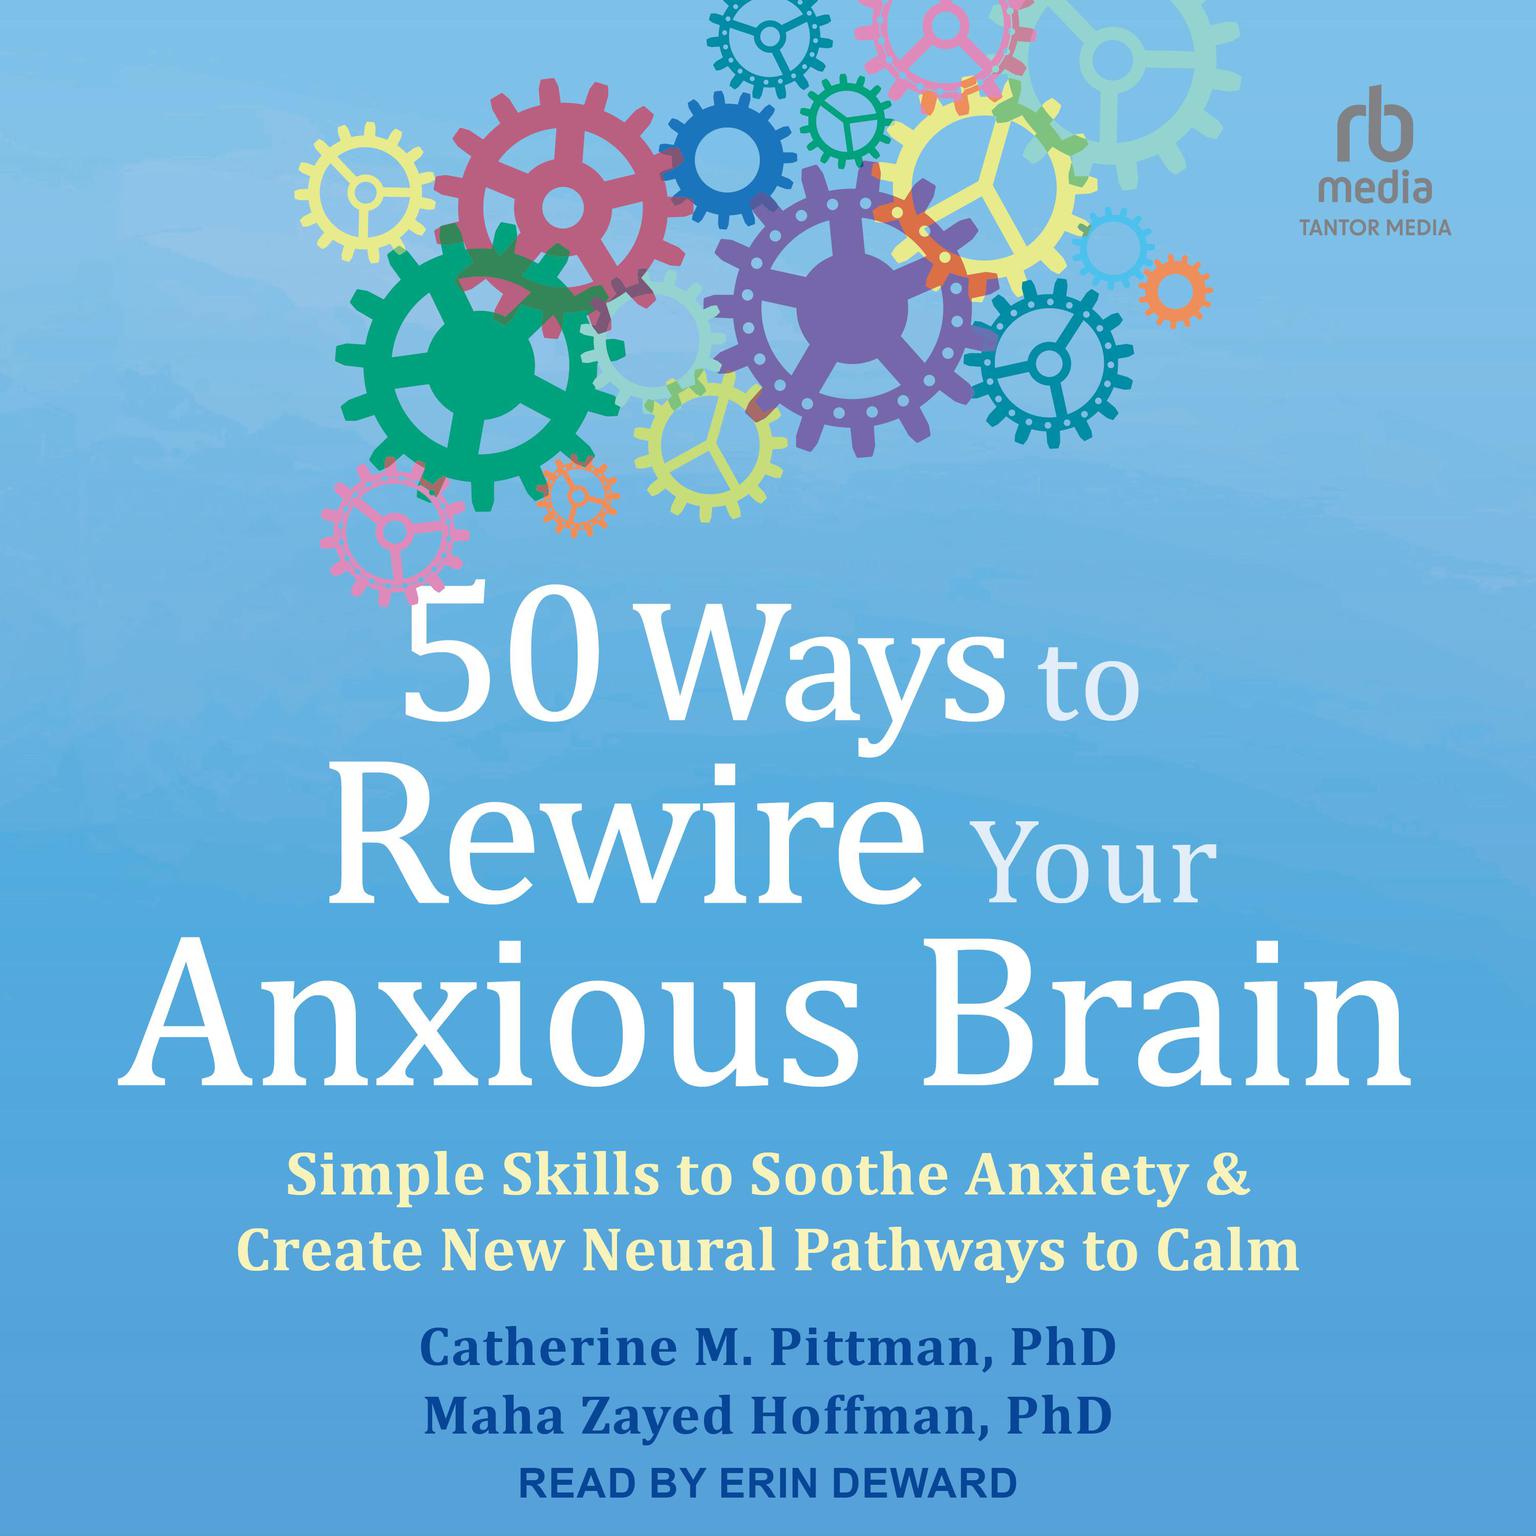 50 Ways to Rewire Your Anxious Brain: Simple Skills to Soothe Anxiety and Create New Neural Pathways to Calm Audiobook, by Catherine M. Pittman